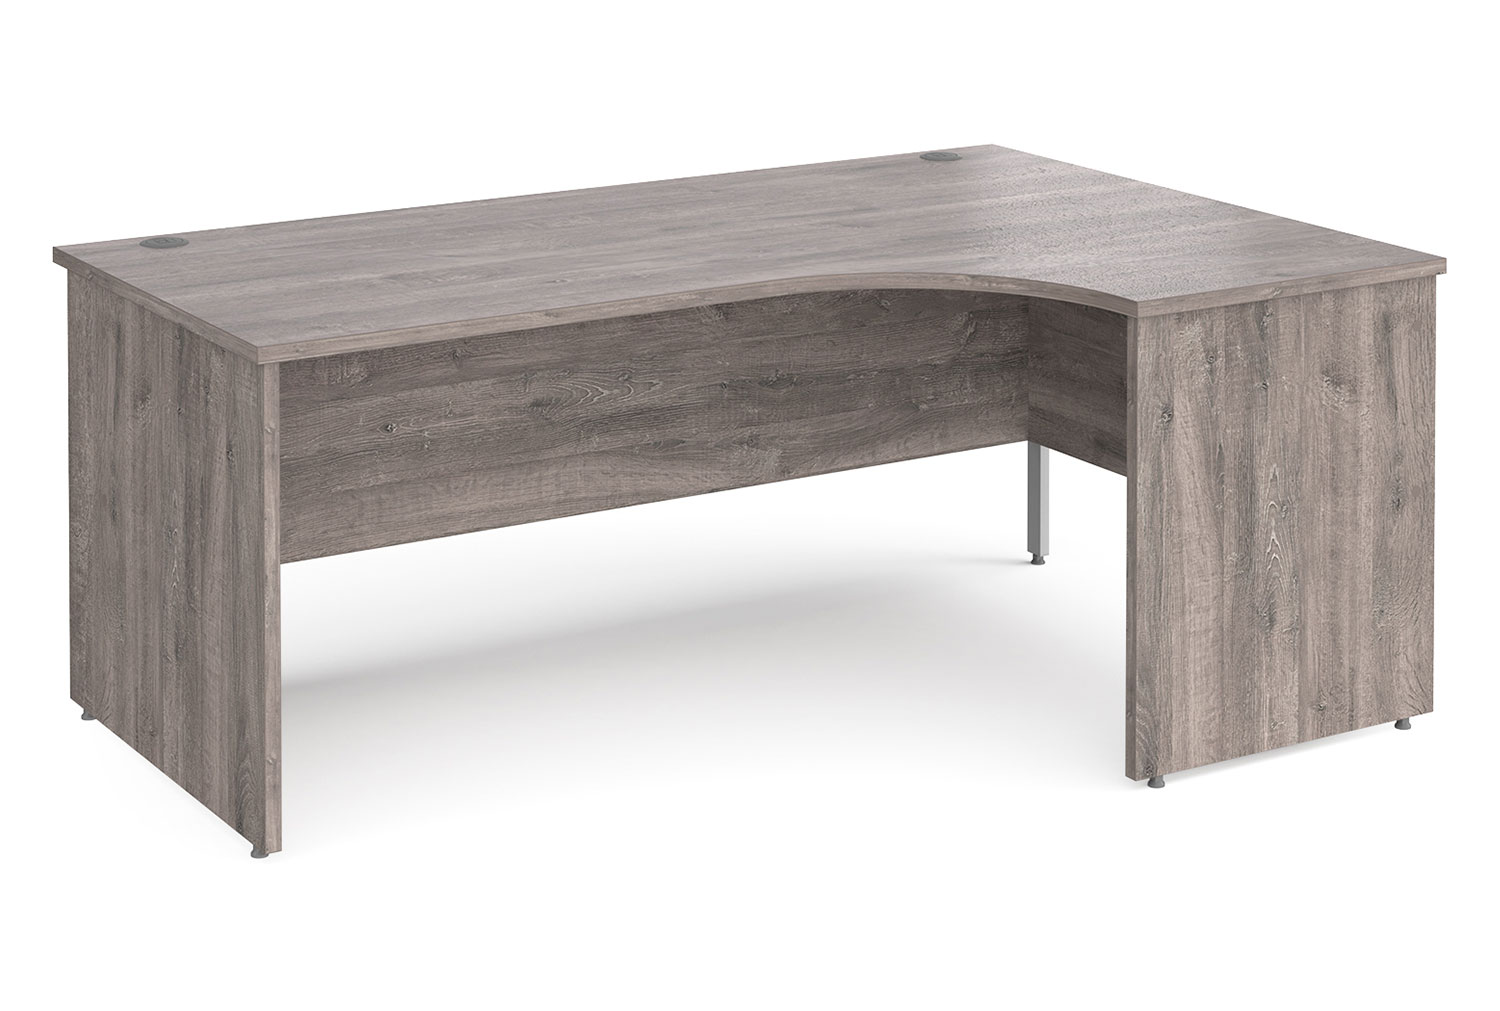 Tully Panel End Right Hand Ergonomic Office Desk, 180wx120/80dx73h (cm), Grey Oak, Fully Installed